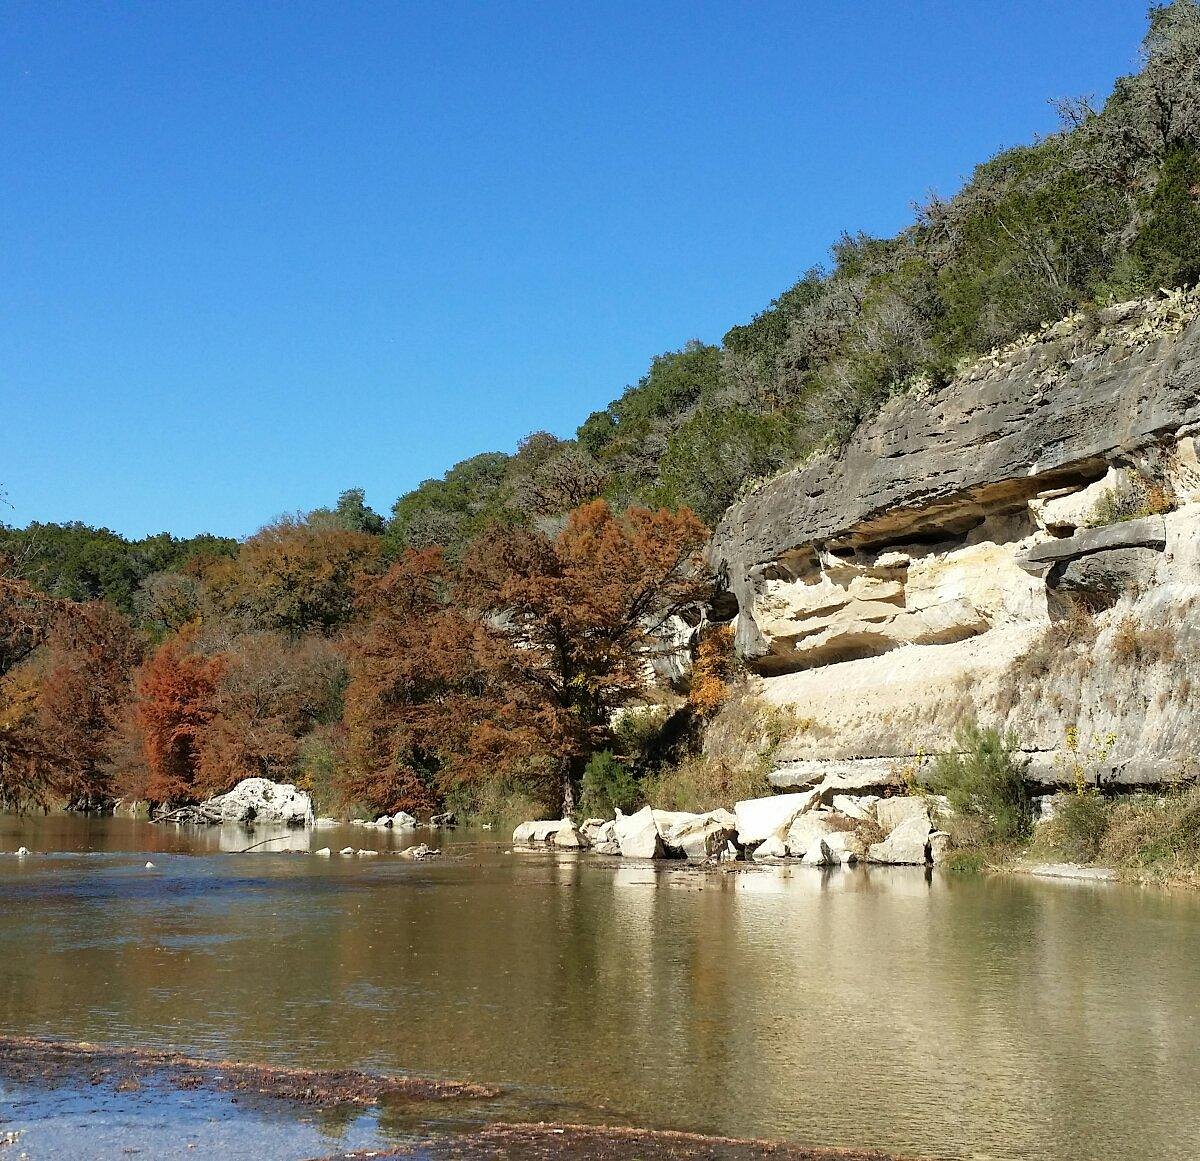 Albums 98+ Images pictures of the guadalupe river Full HD, 2k, 4k